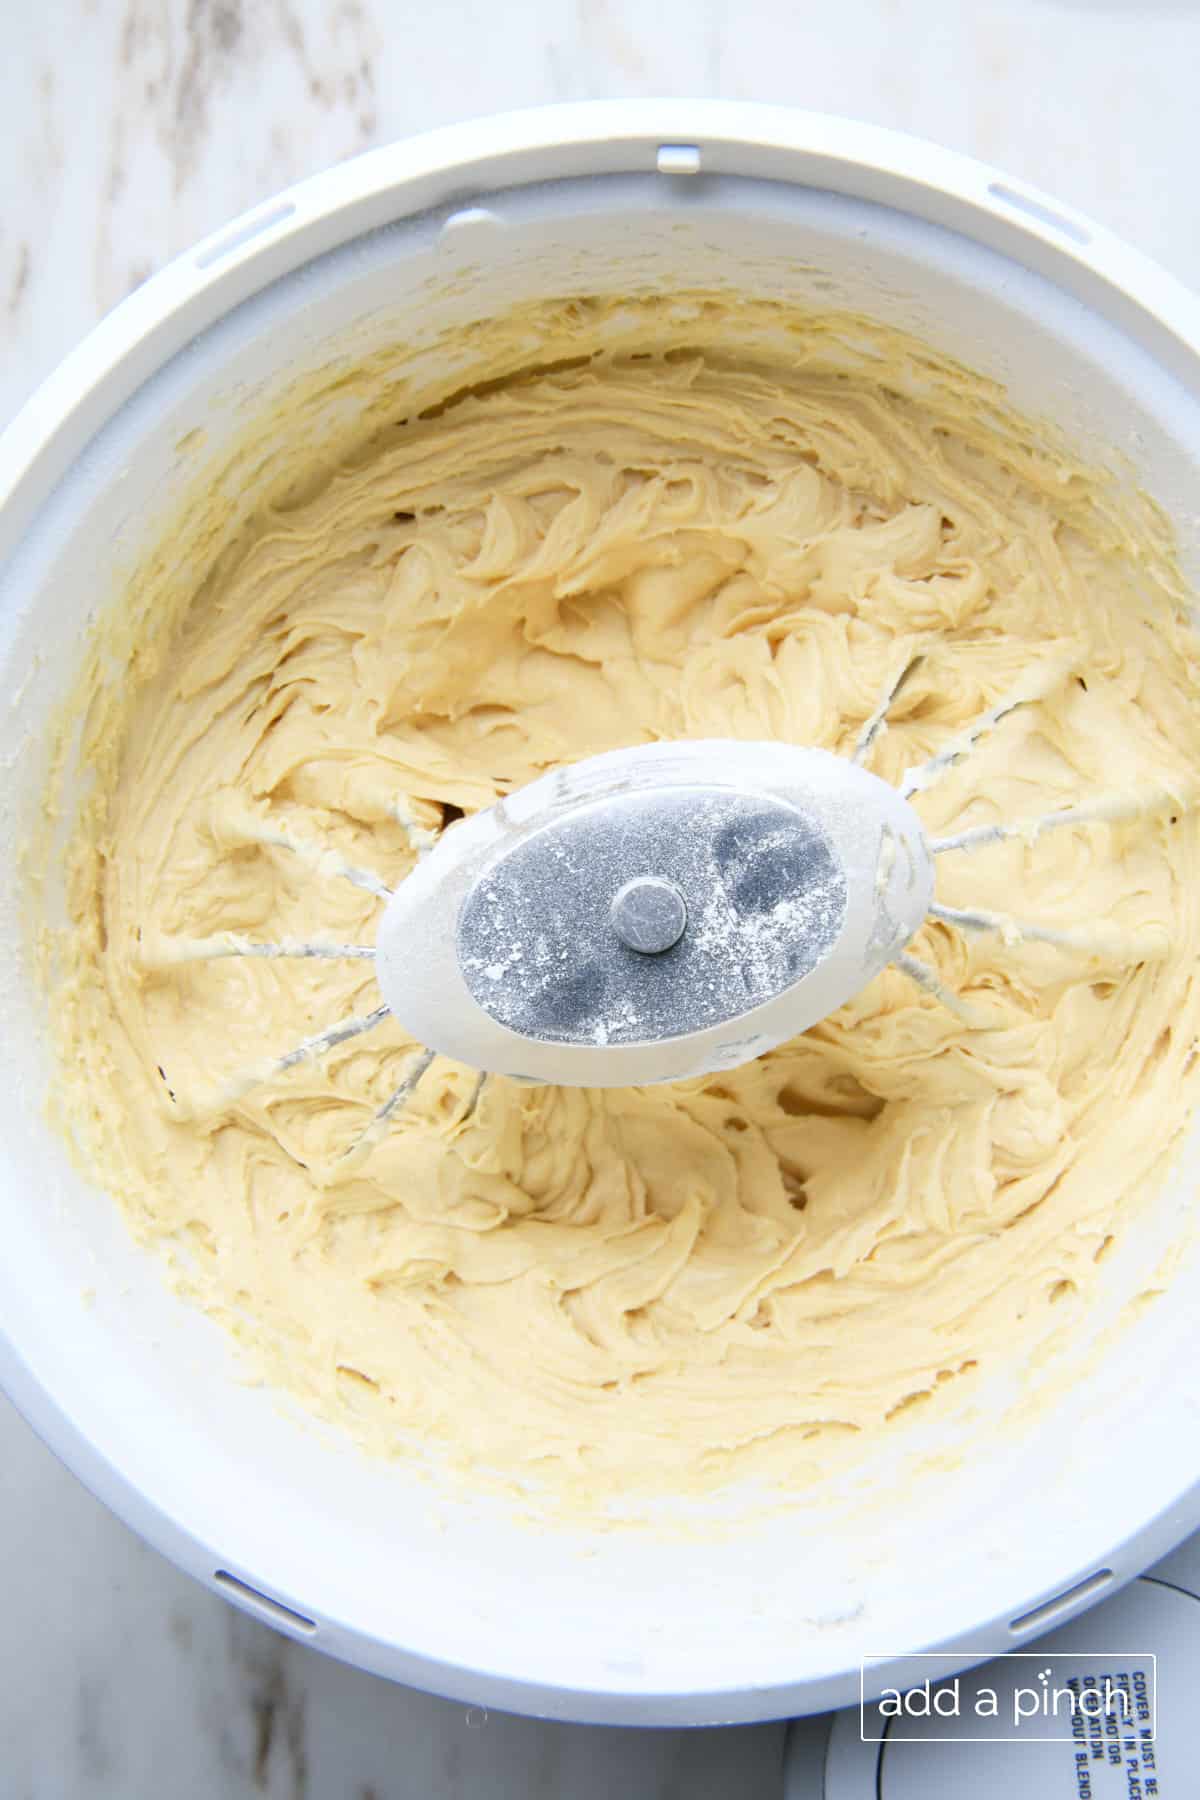 Lemon pound cake batter after all ingredients have been mixed together in the stand mixing bowl.